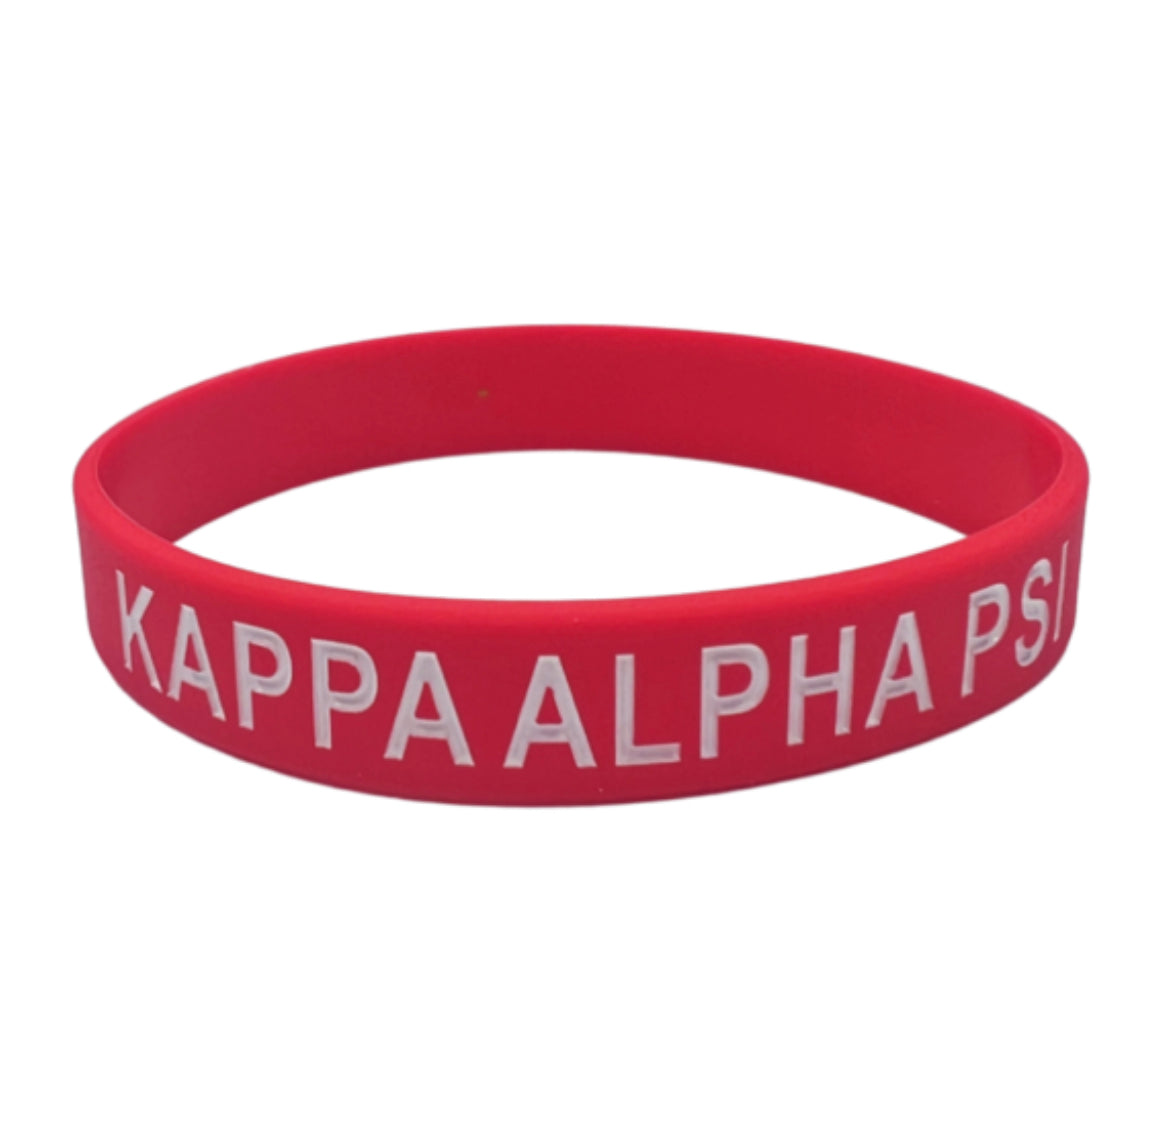 Show your pride for Kappa Alpha Psi with this "THE BOND" silicone band. Perfect for fraternity members, this collectible is a must-have for any historical memorabilia or fraternal organization enthusiast. The bold design features the iconic Kappa Alpha Psi emblem, making it a great addition to any jewelry collection. Made of high-quality silicone, this band is durable and suitable for everyday wear.